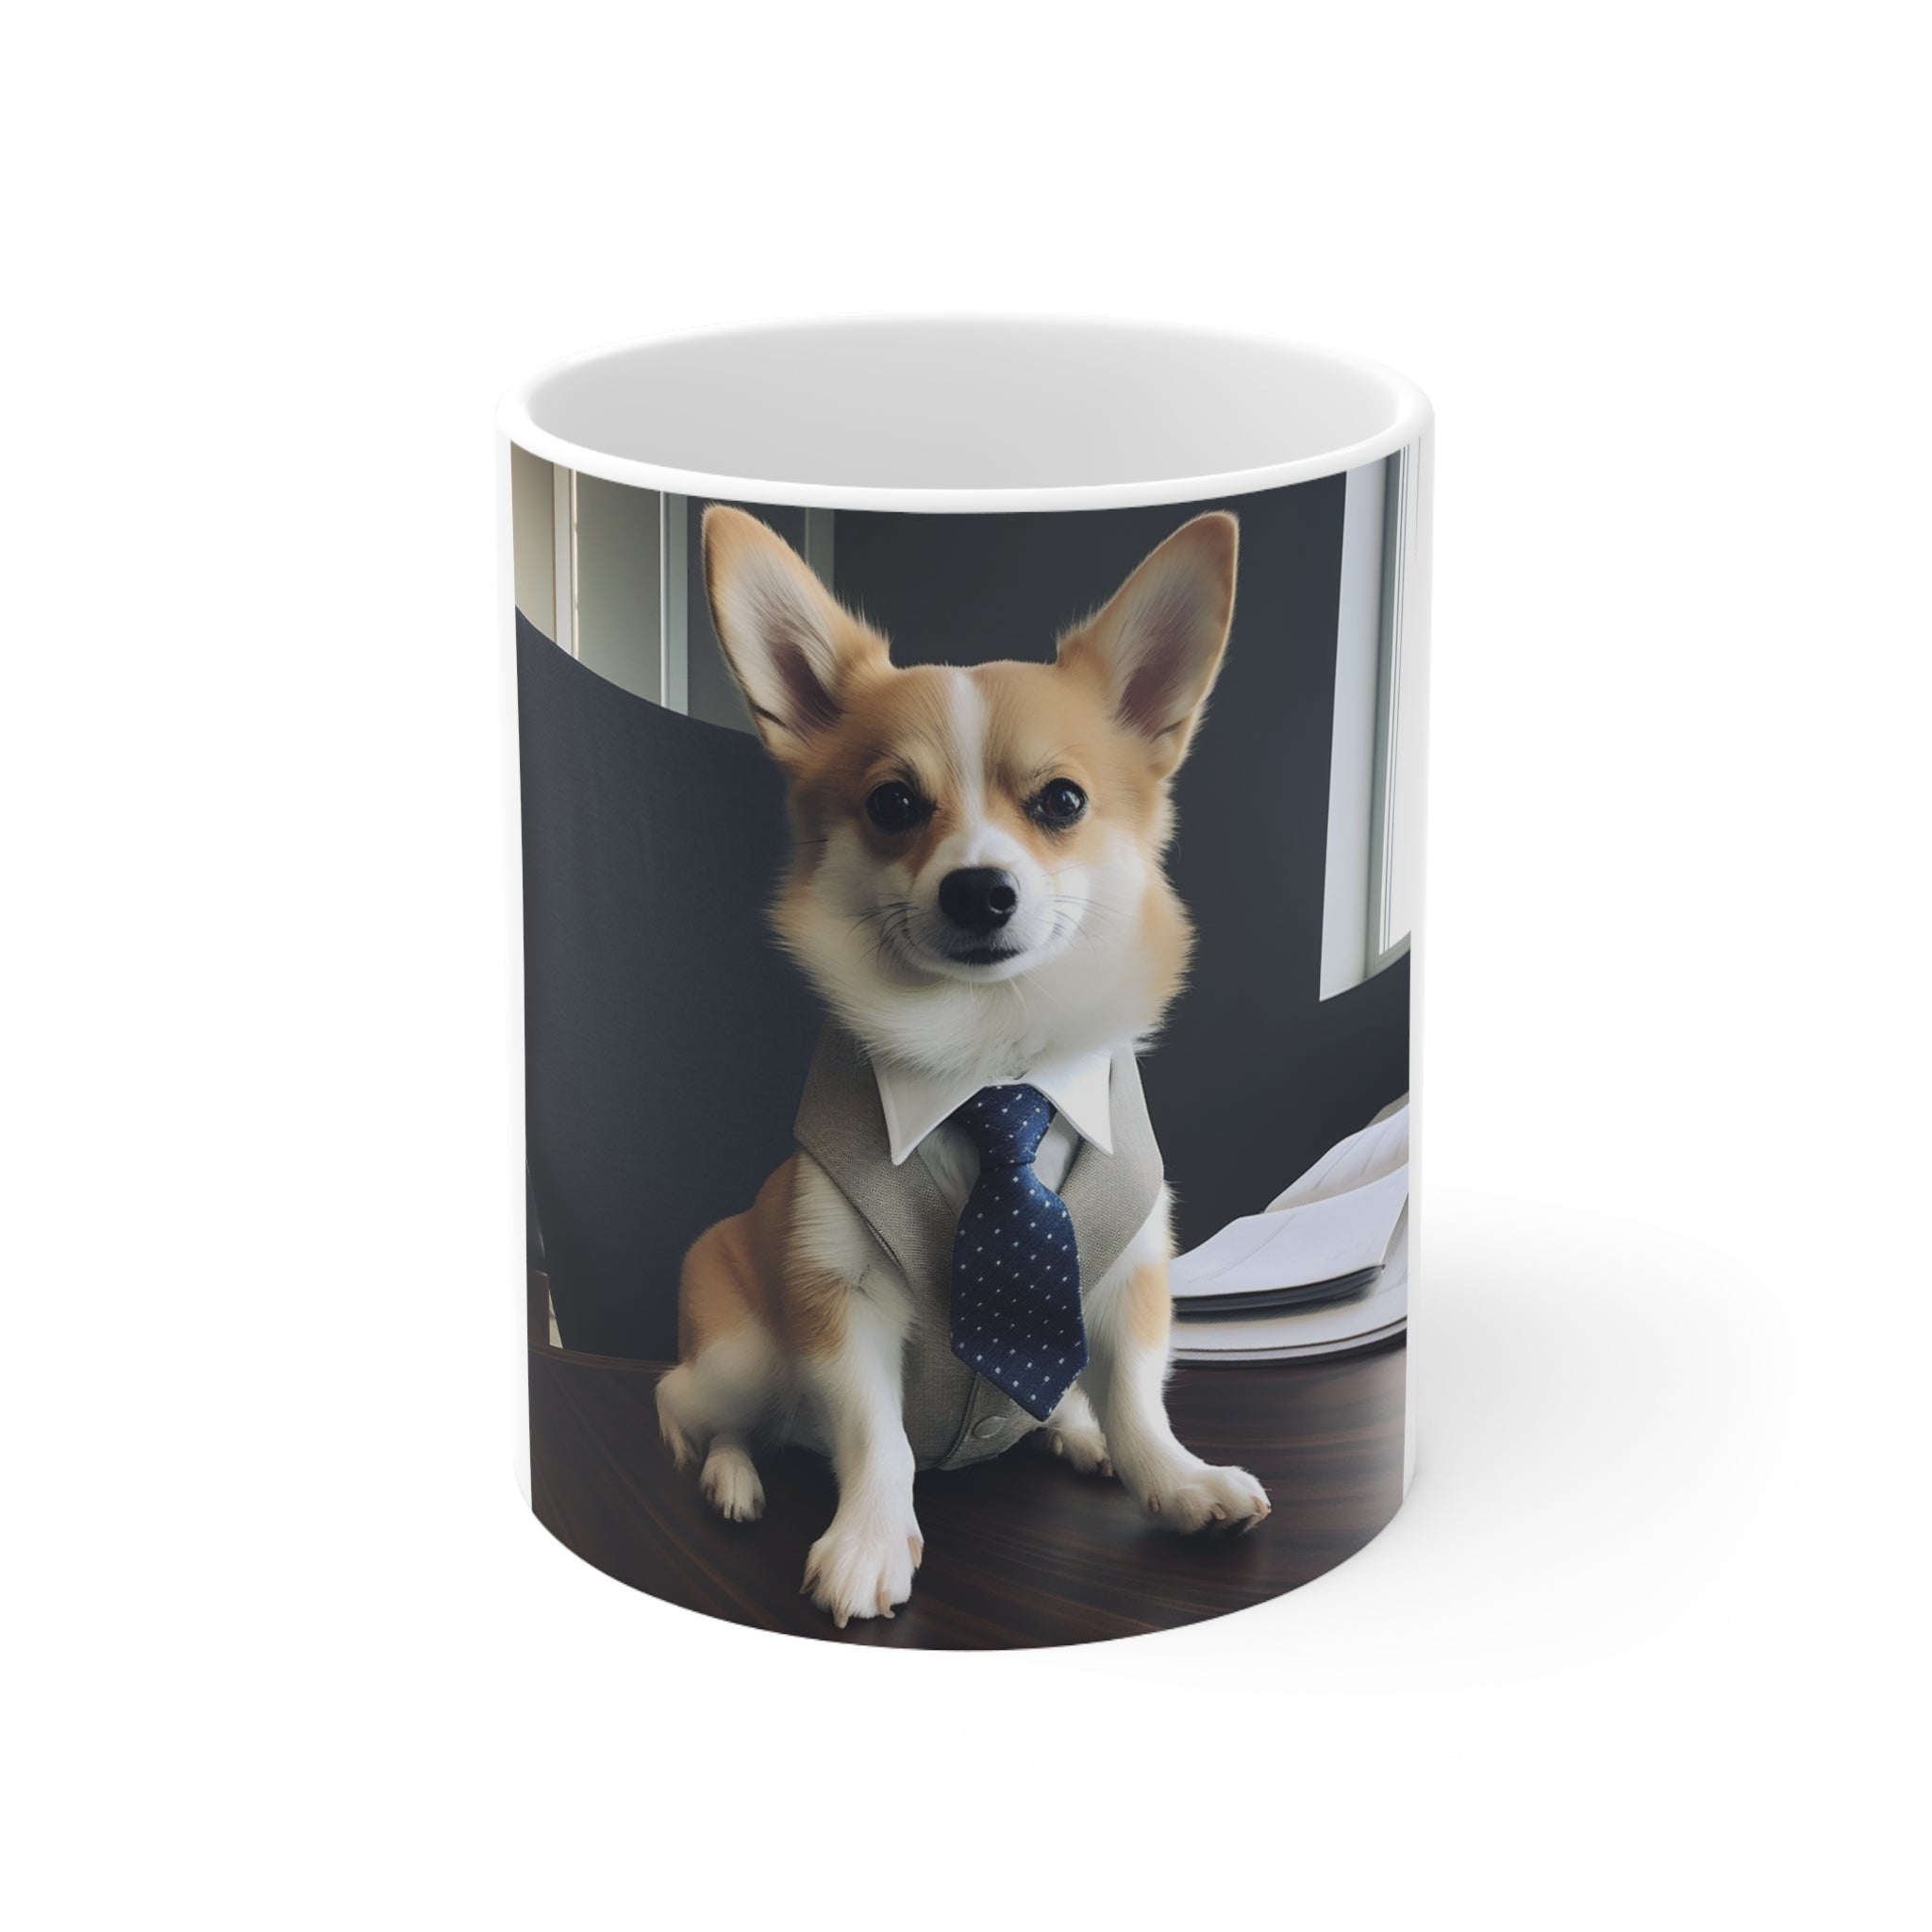 "Do I have the Job?" Cute Puppy in Interview Attire Ceramic Mug 11oz - Funny Dog Interview Coffee Cup Gift for Coffee Drinkers and Coffee Lovers